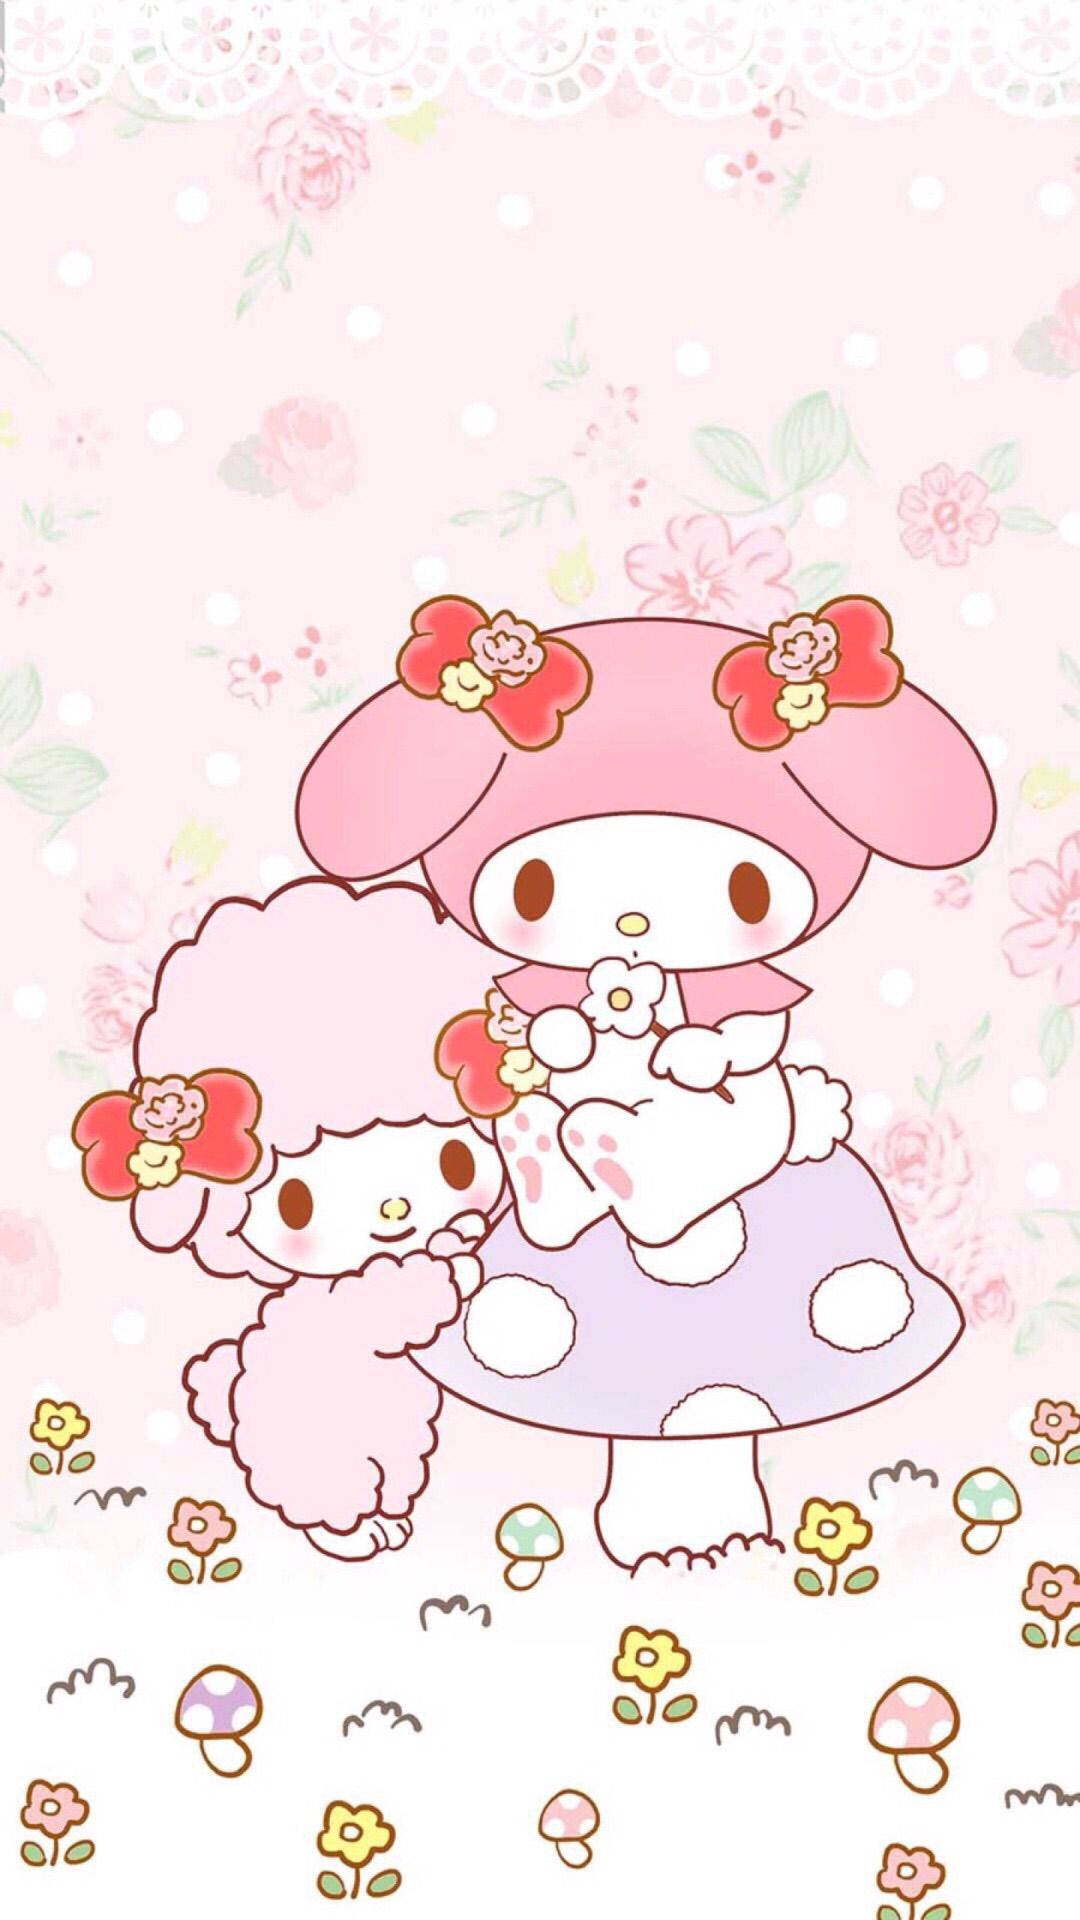 200+] My Melody Wallpapers